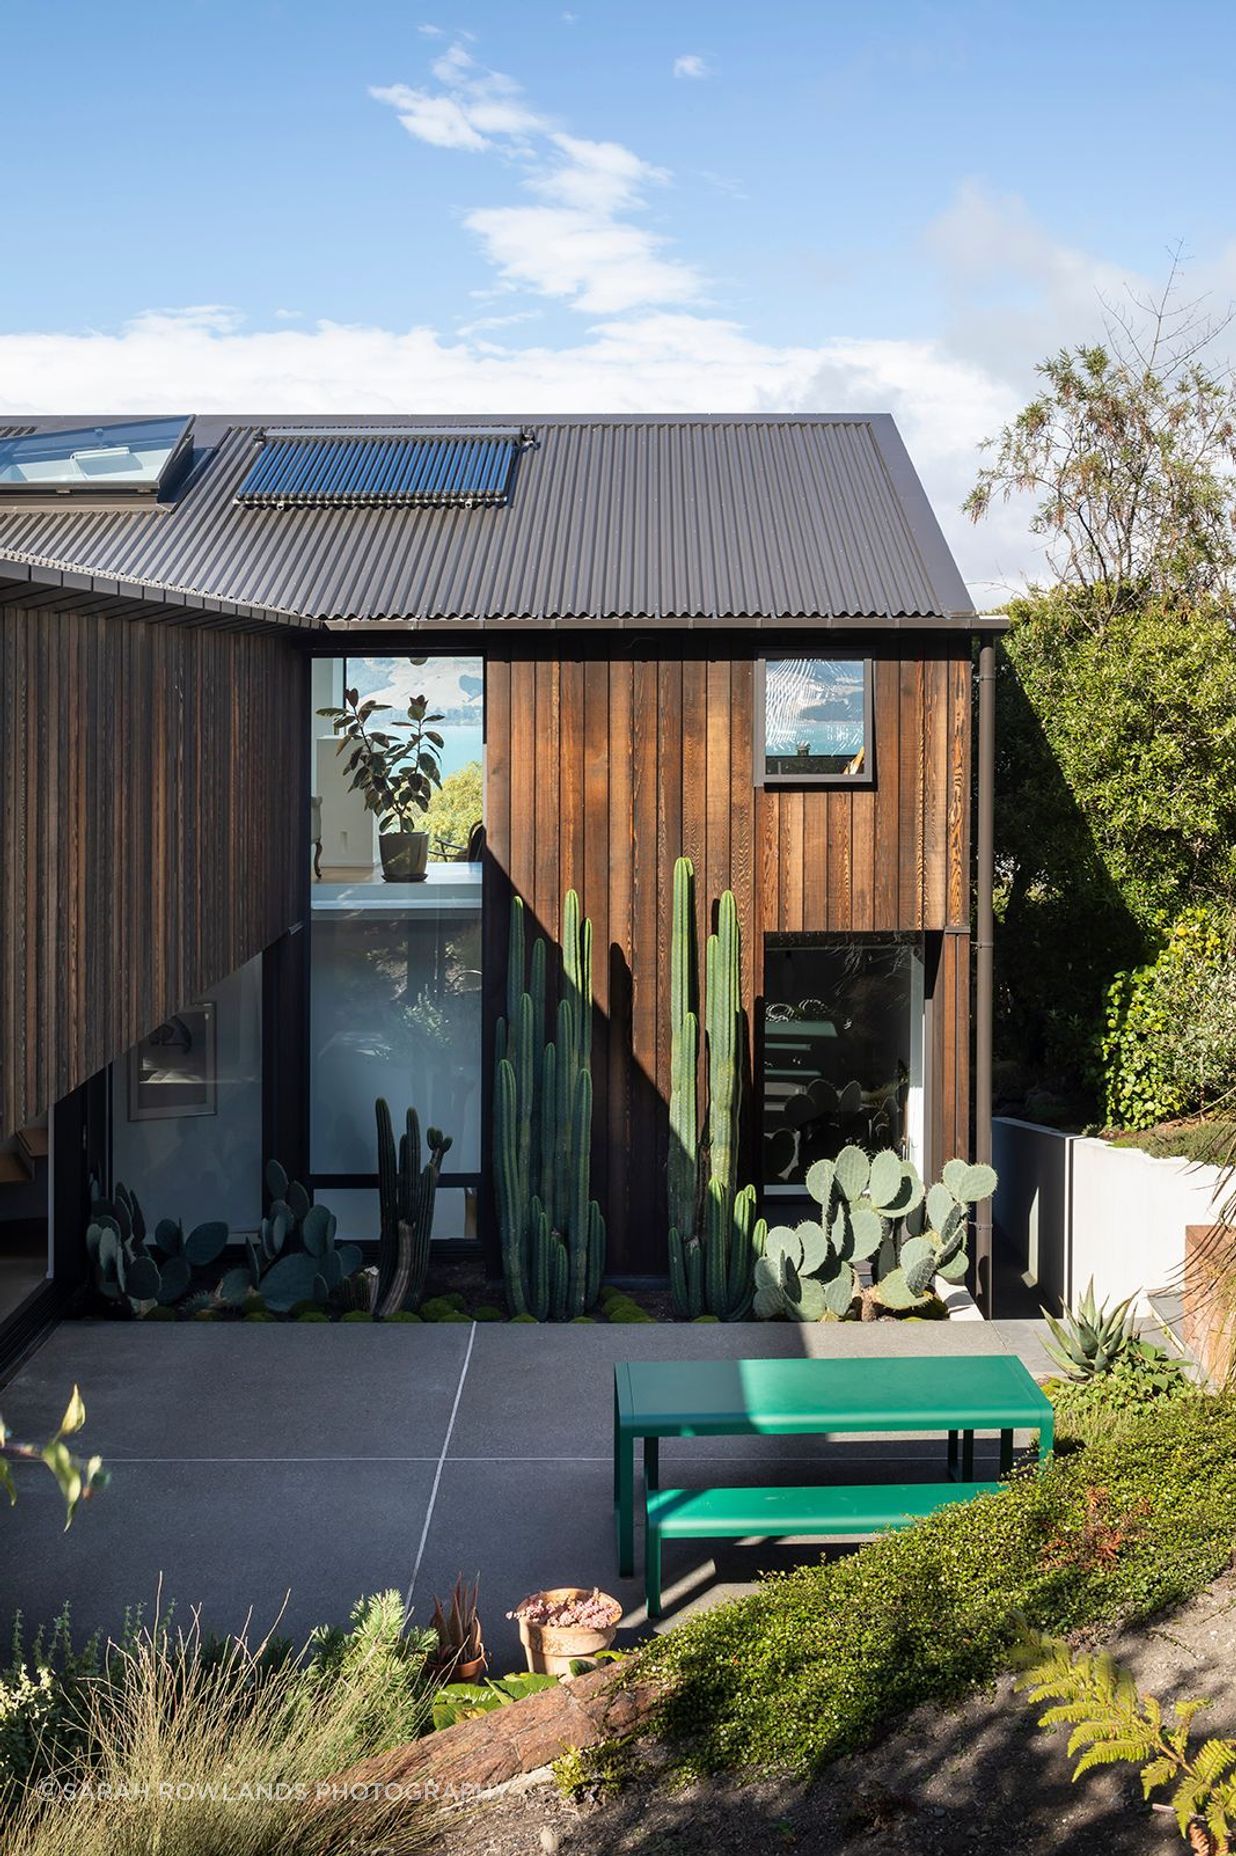 The dark stained cedar cladding was chosen for its ability to blend into the bush surrounds.